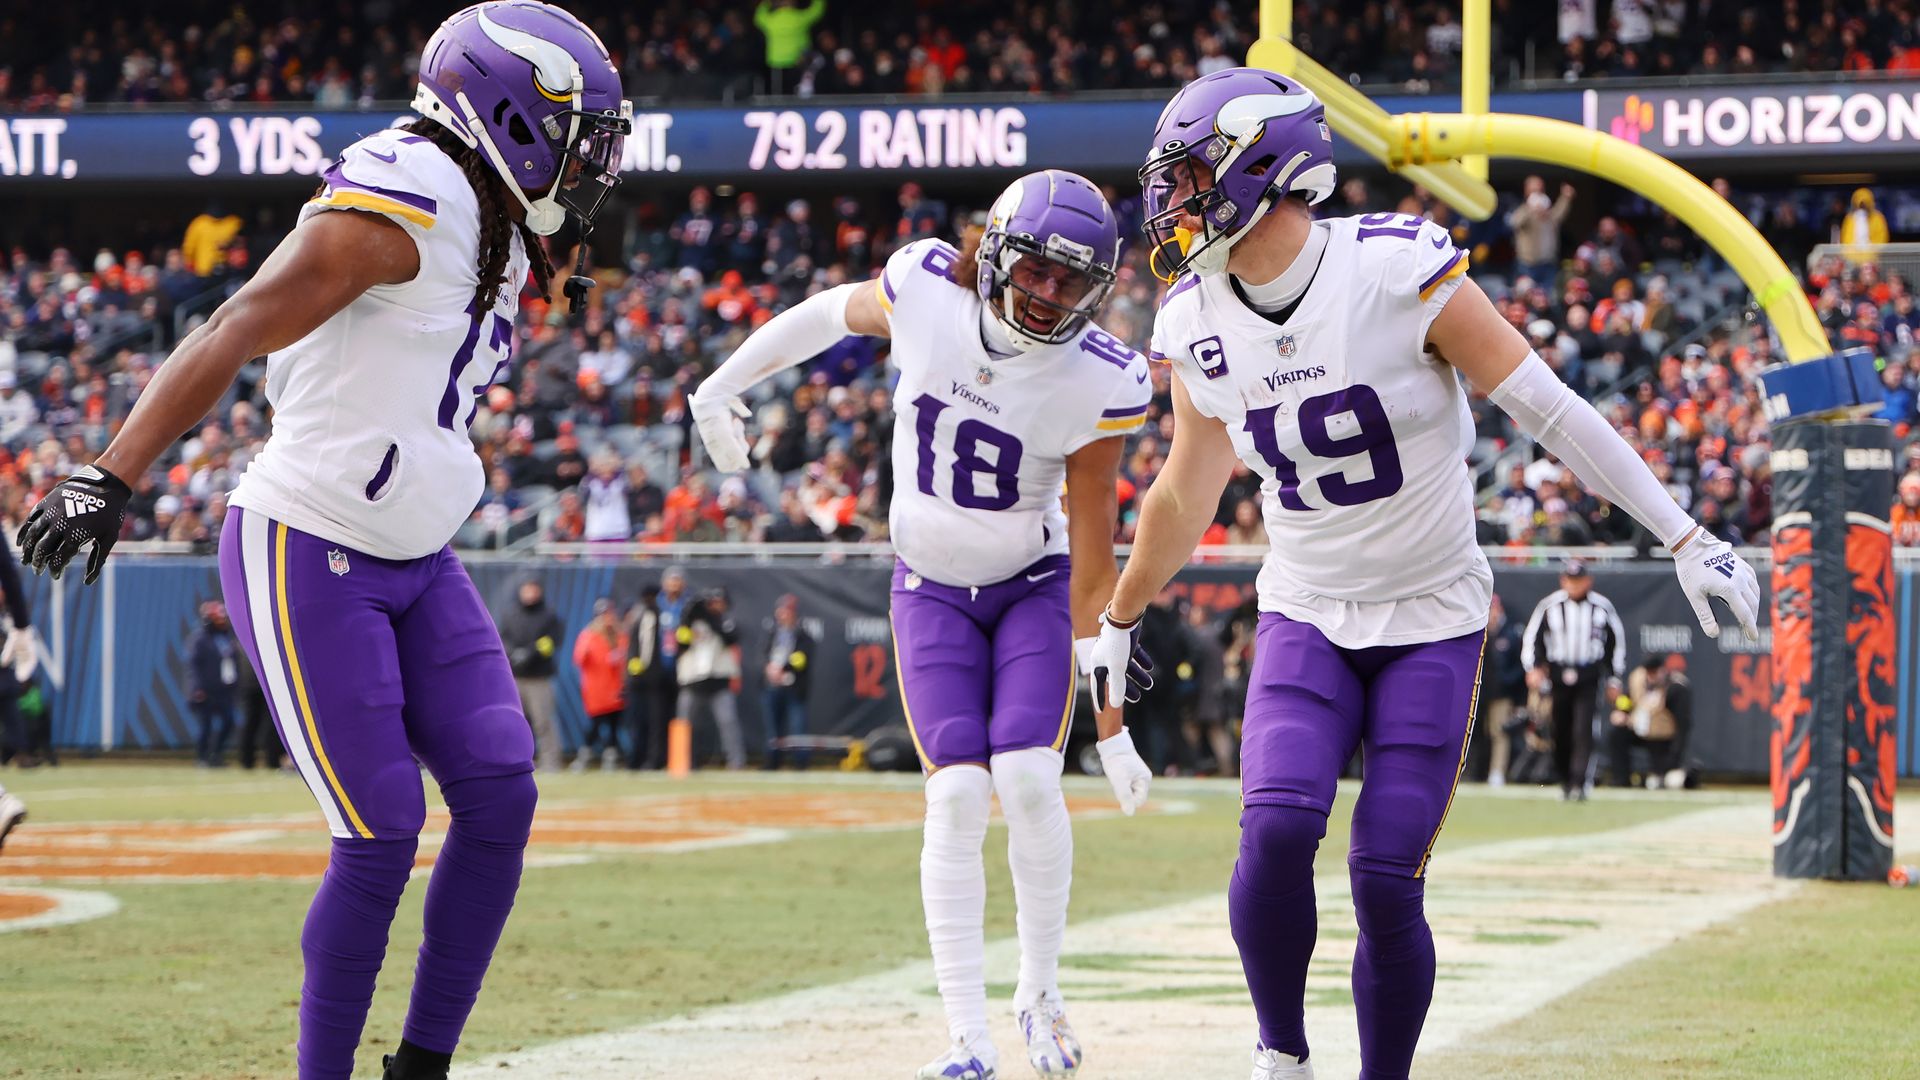 Three Minnesota Vikings players in white and purple uniforms on a football field.